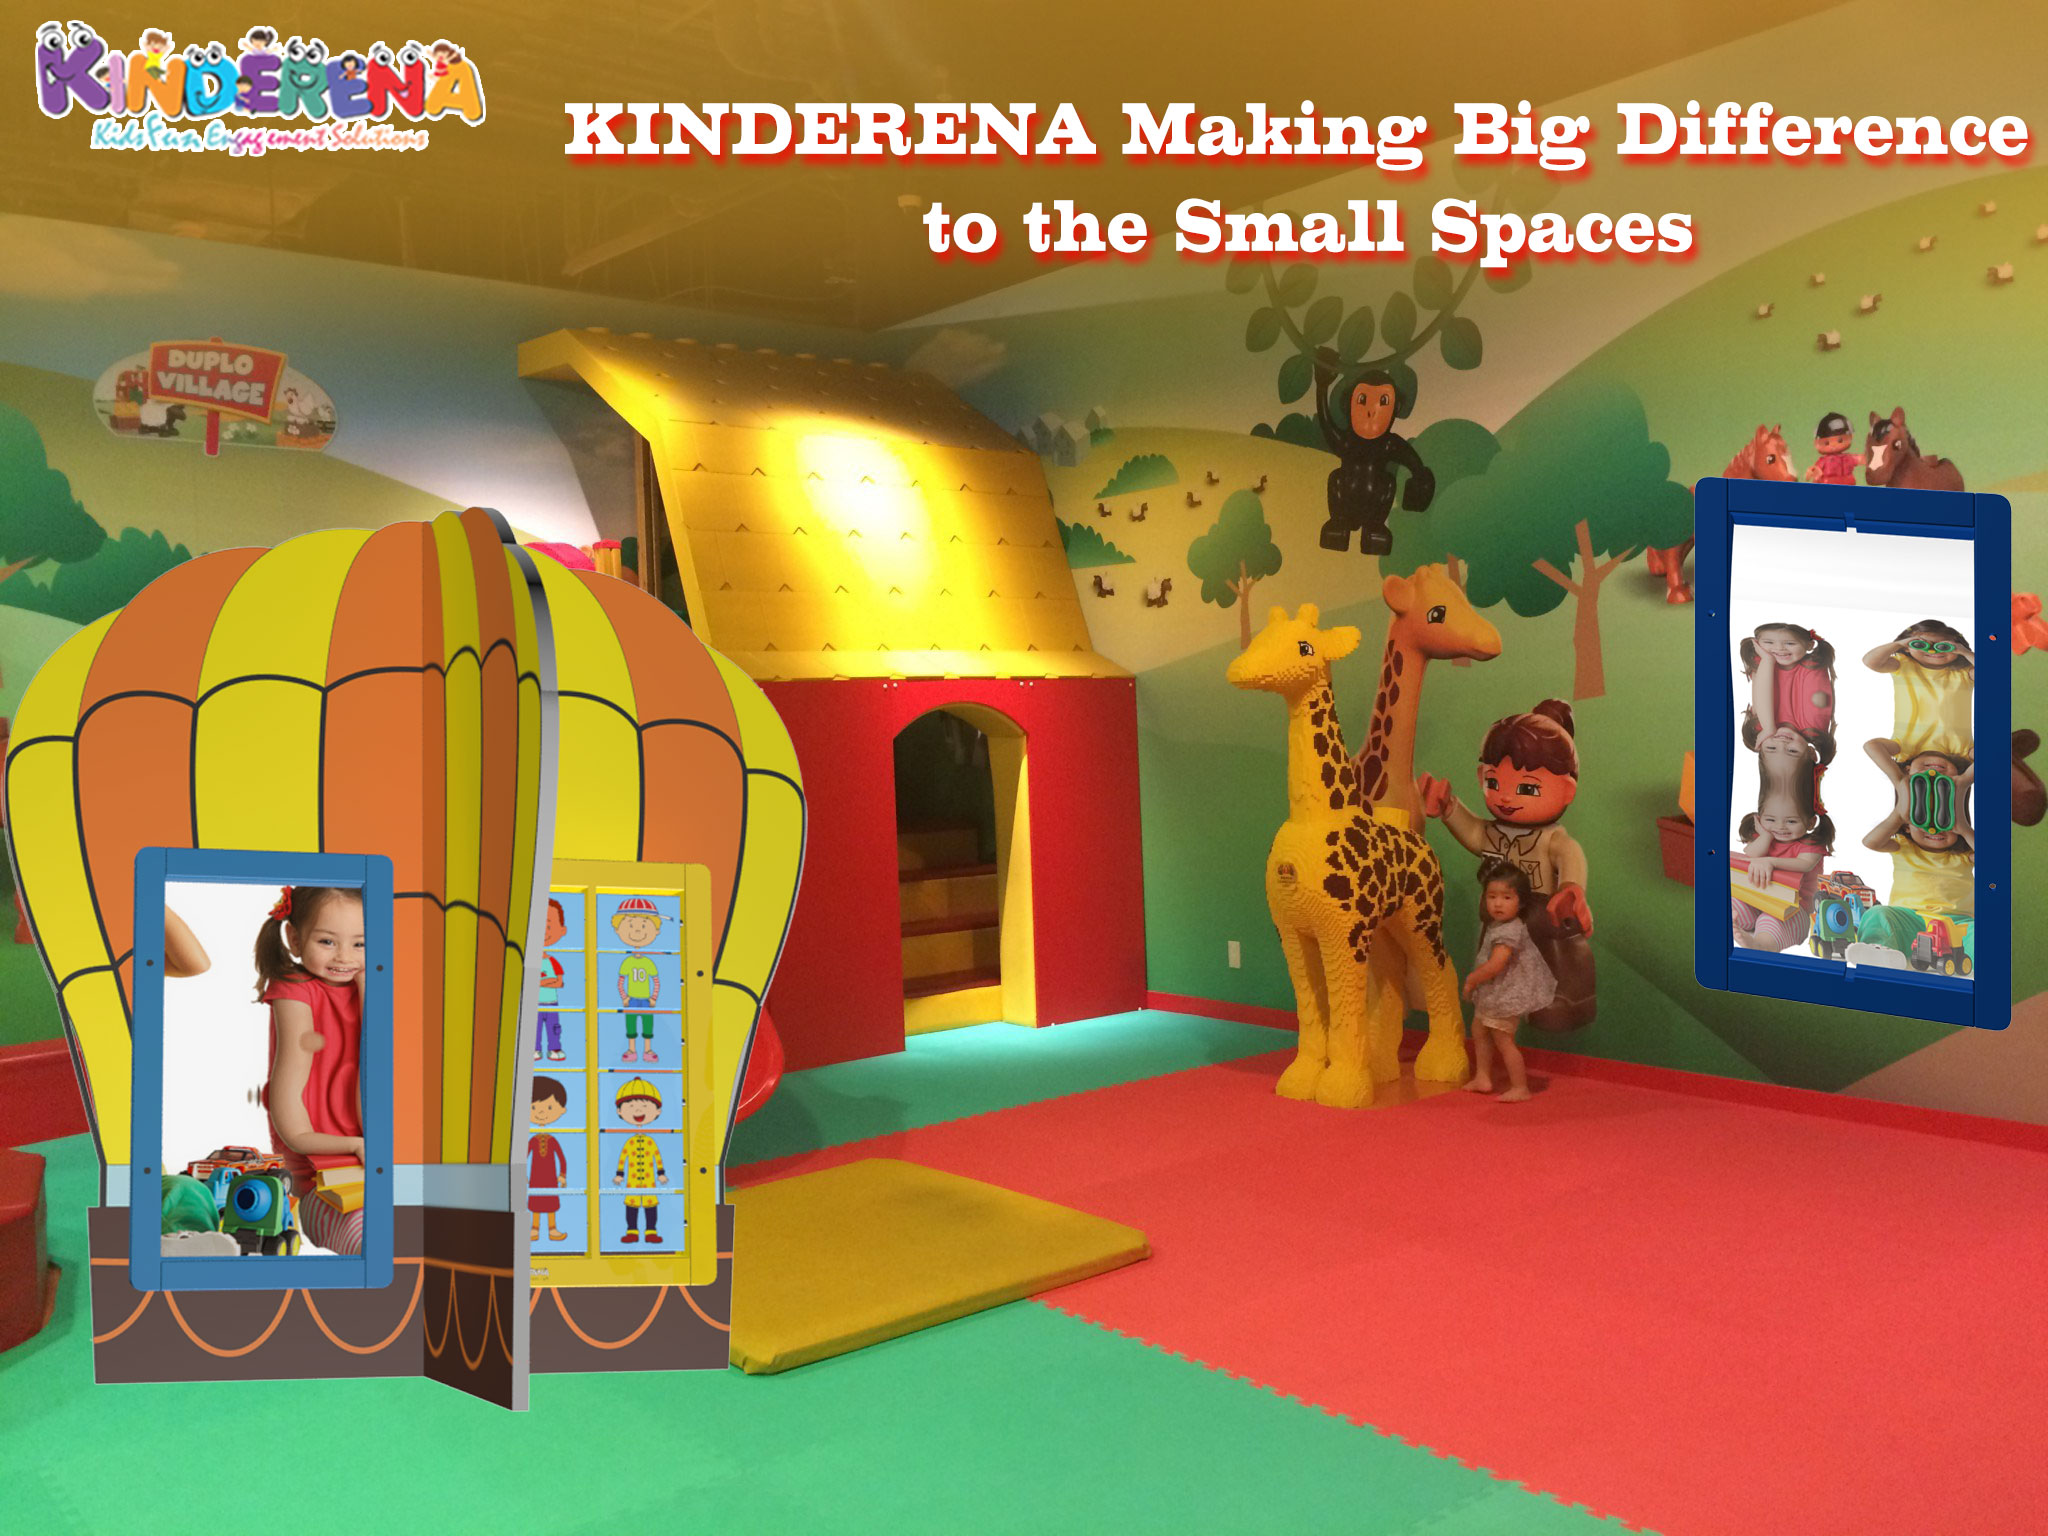 KINDERENA Making Big Difference to the Small Spaces